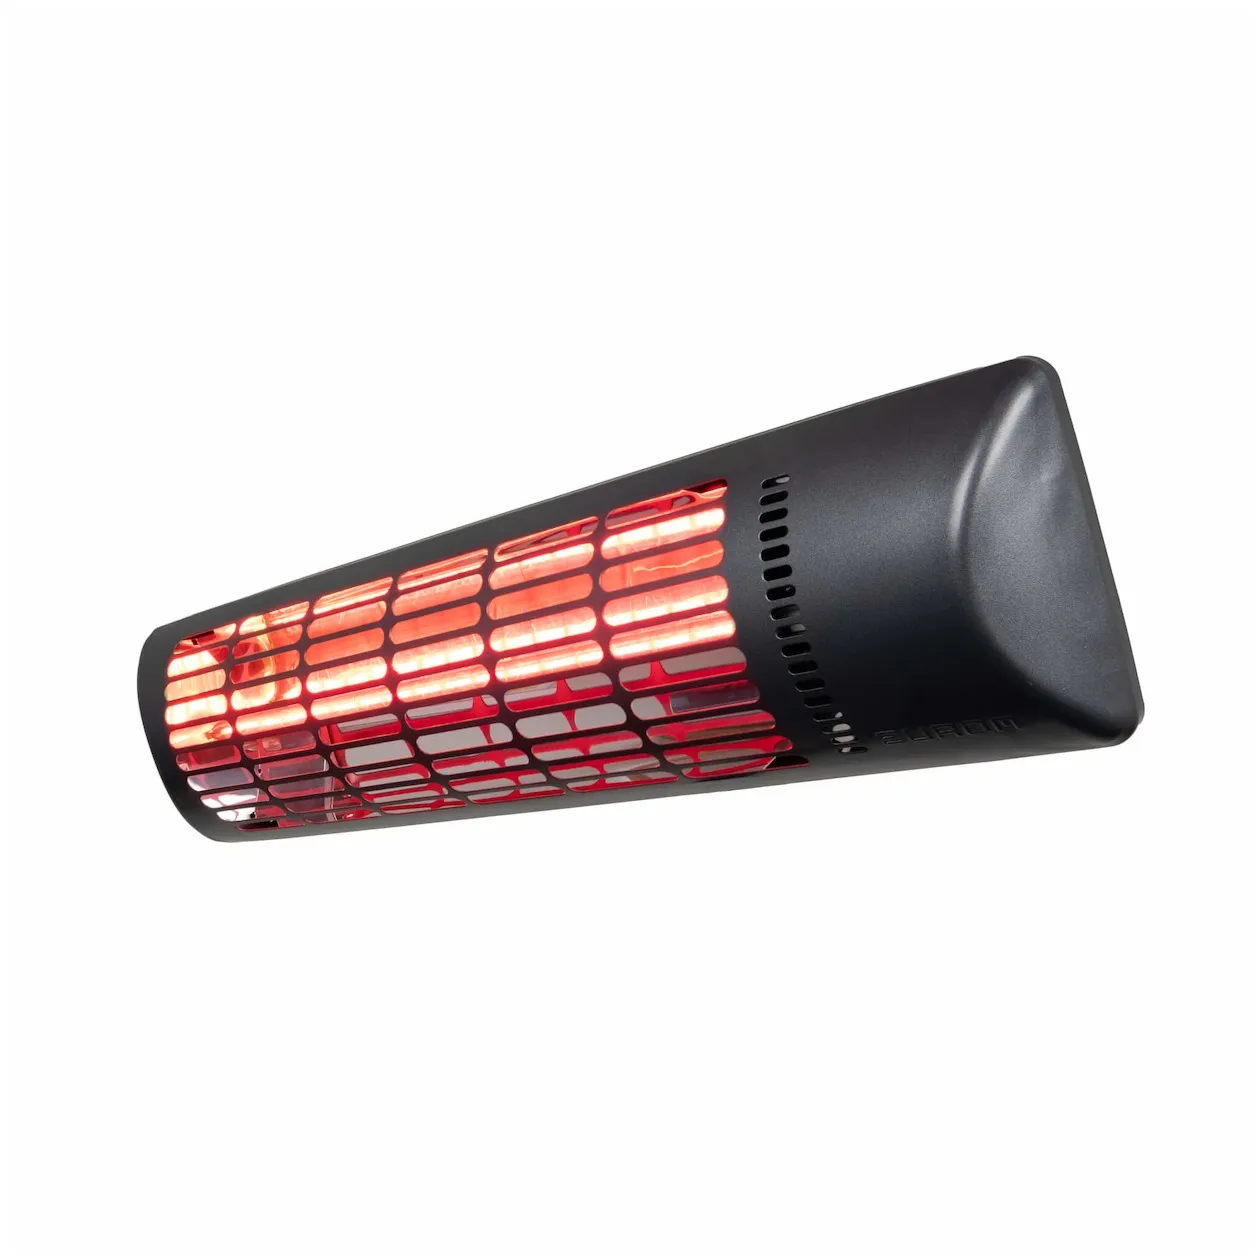 Eurom Q-time Golden 1800 Patioheater